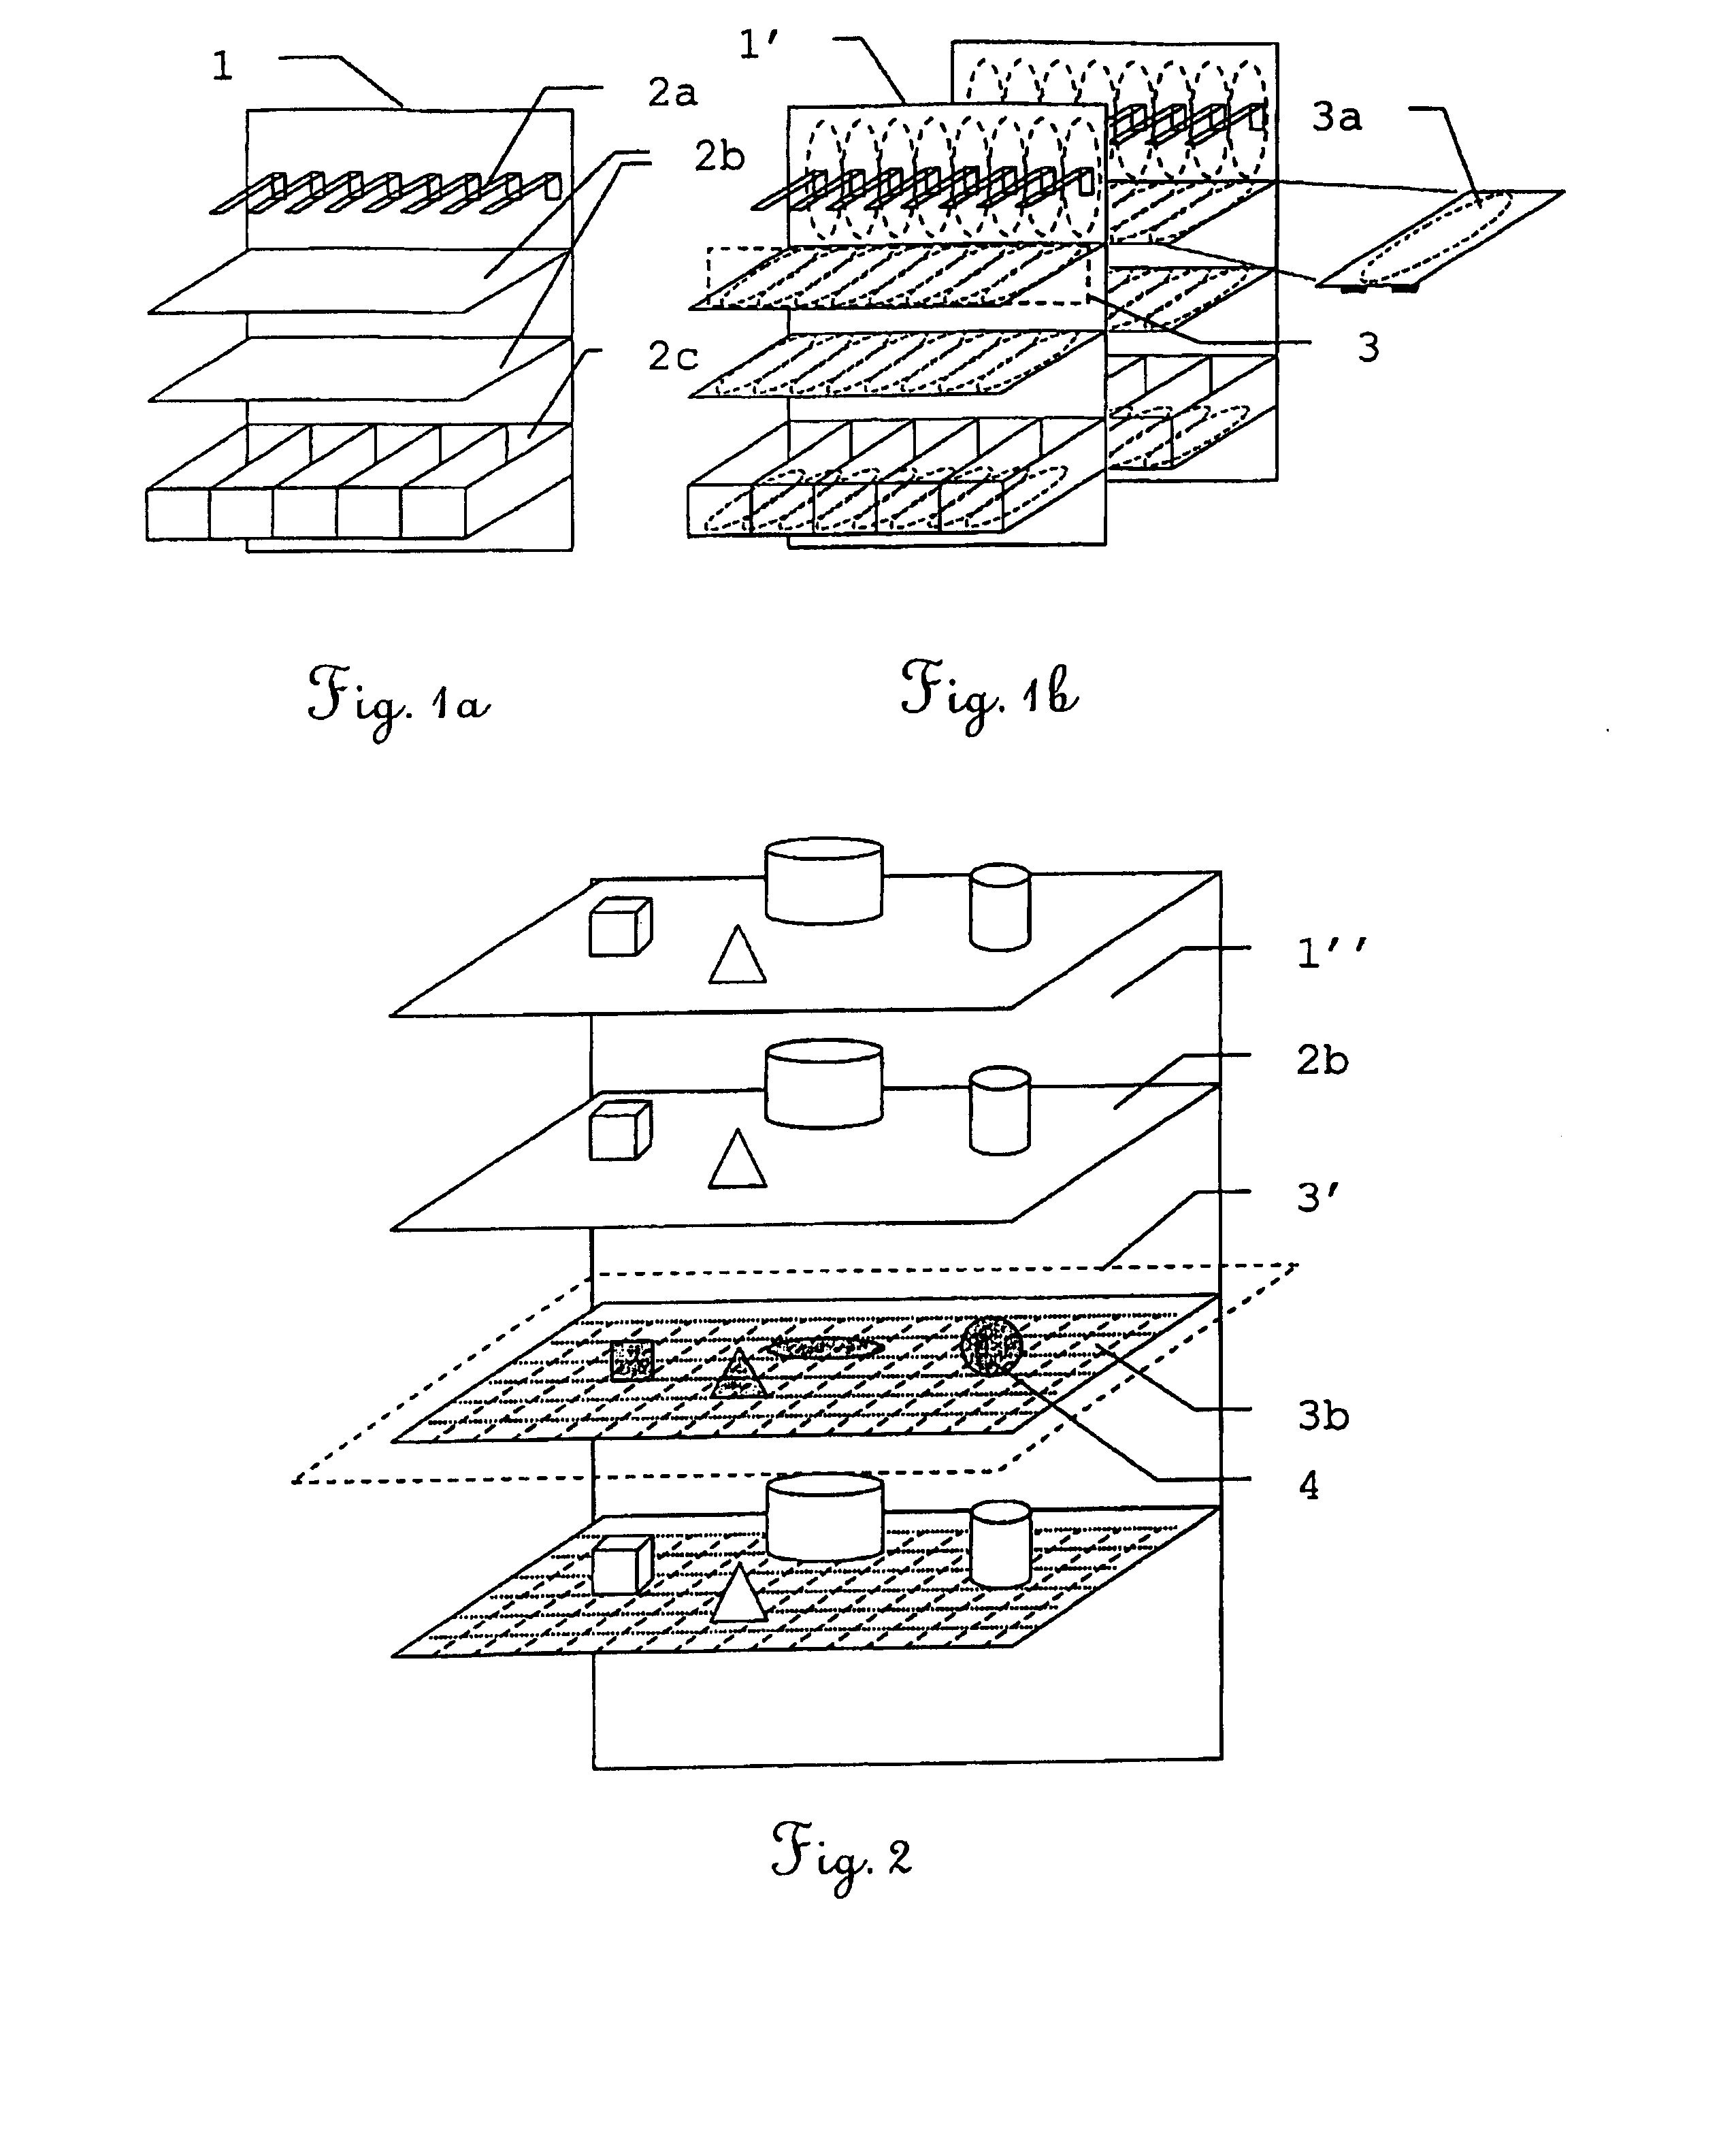 Stocking system and method for managing stocking